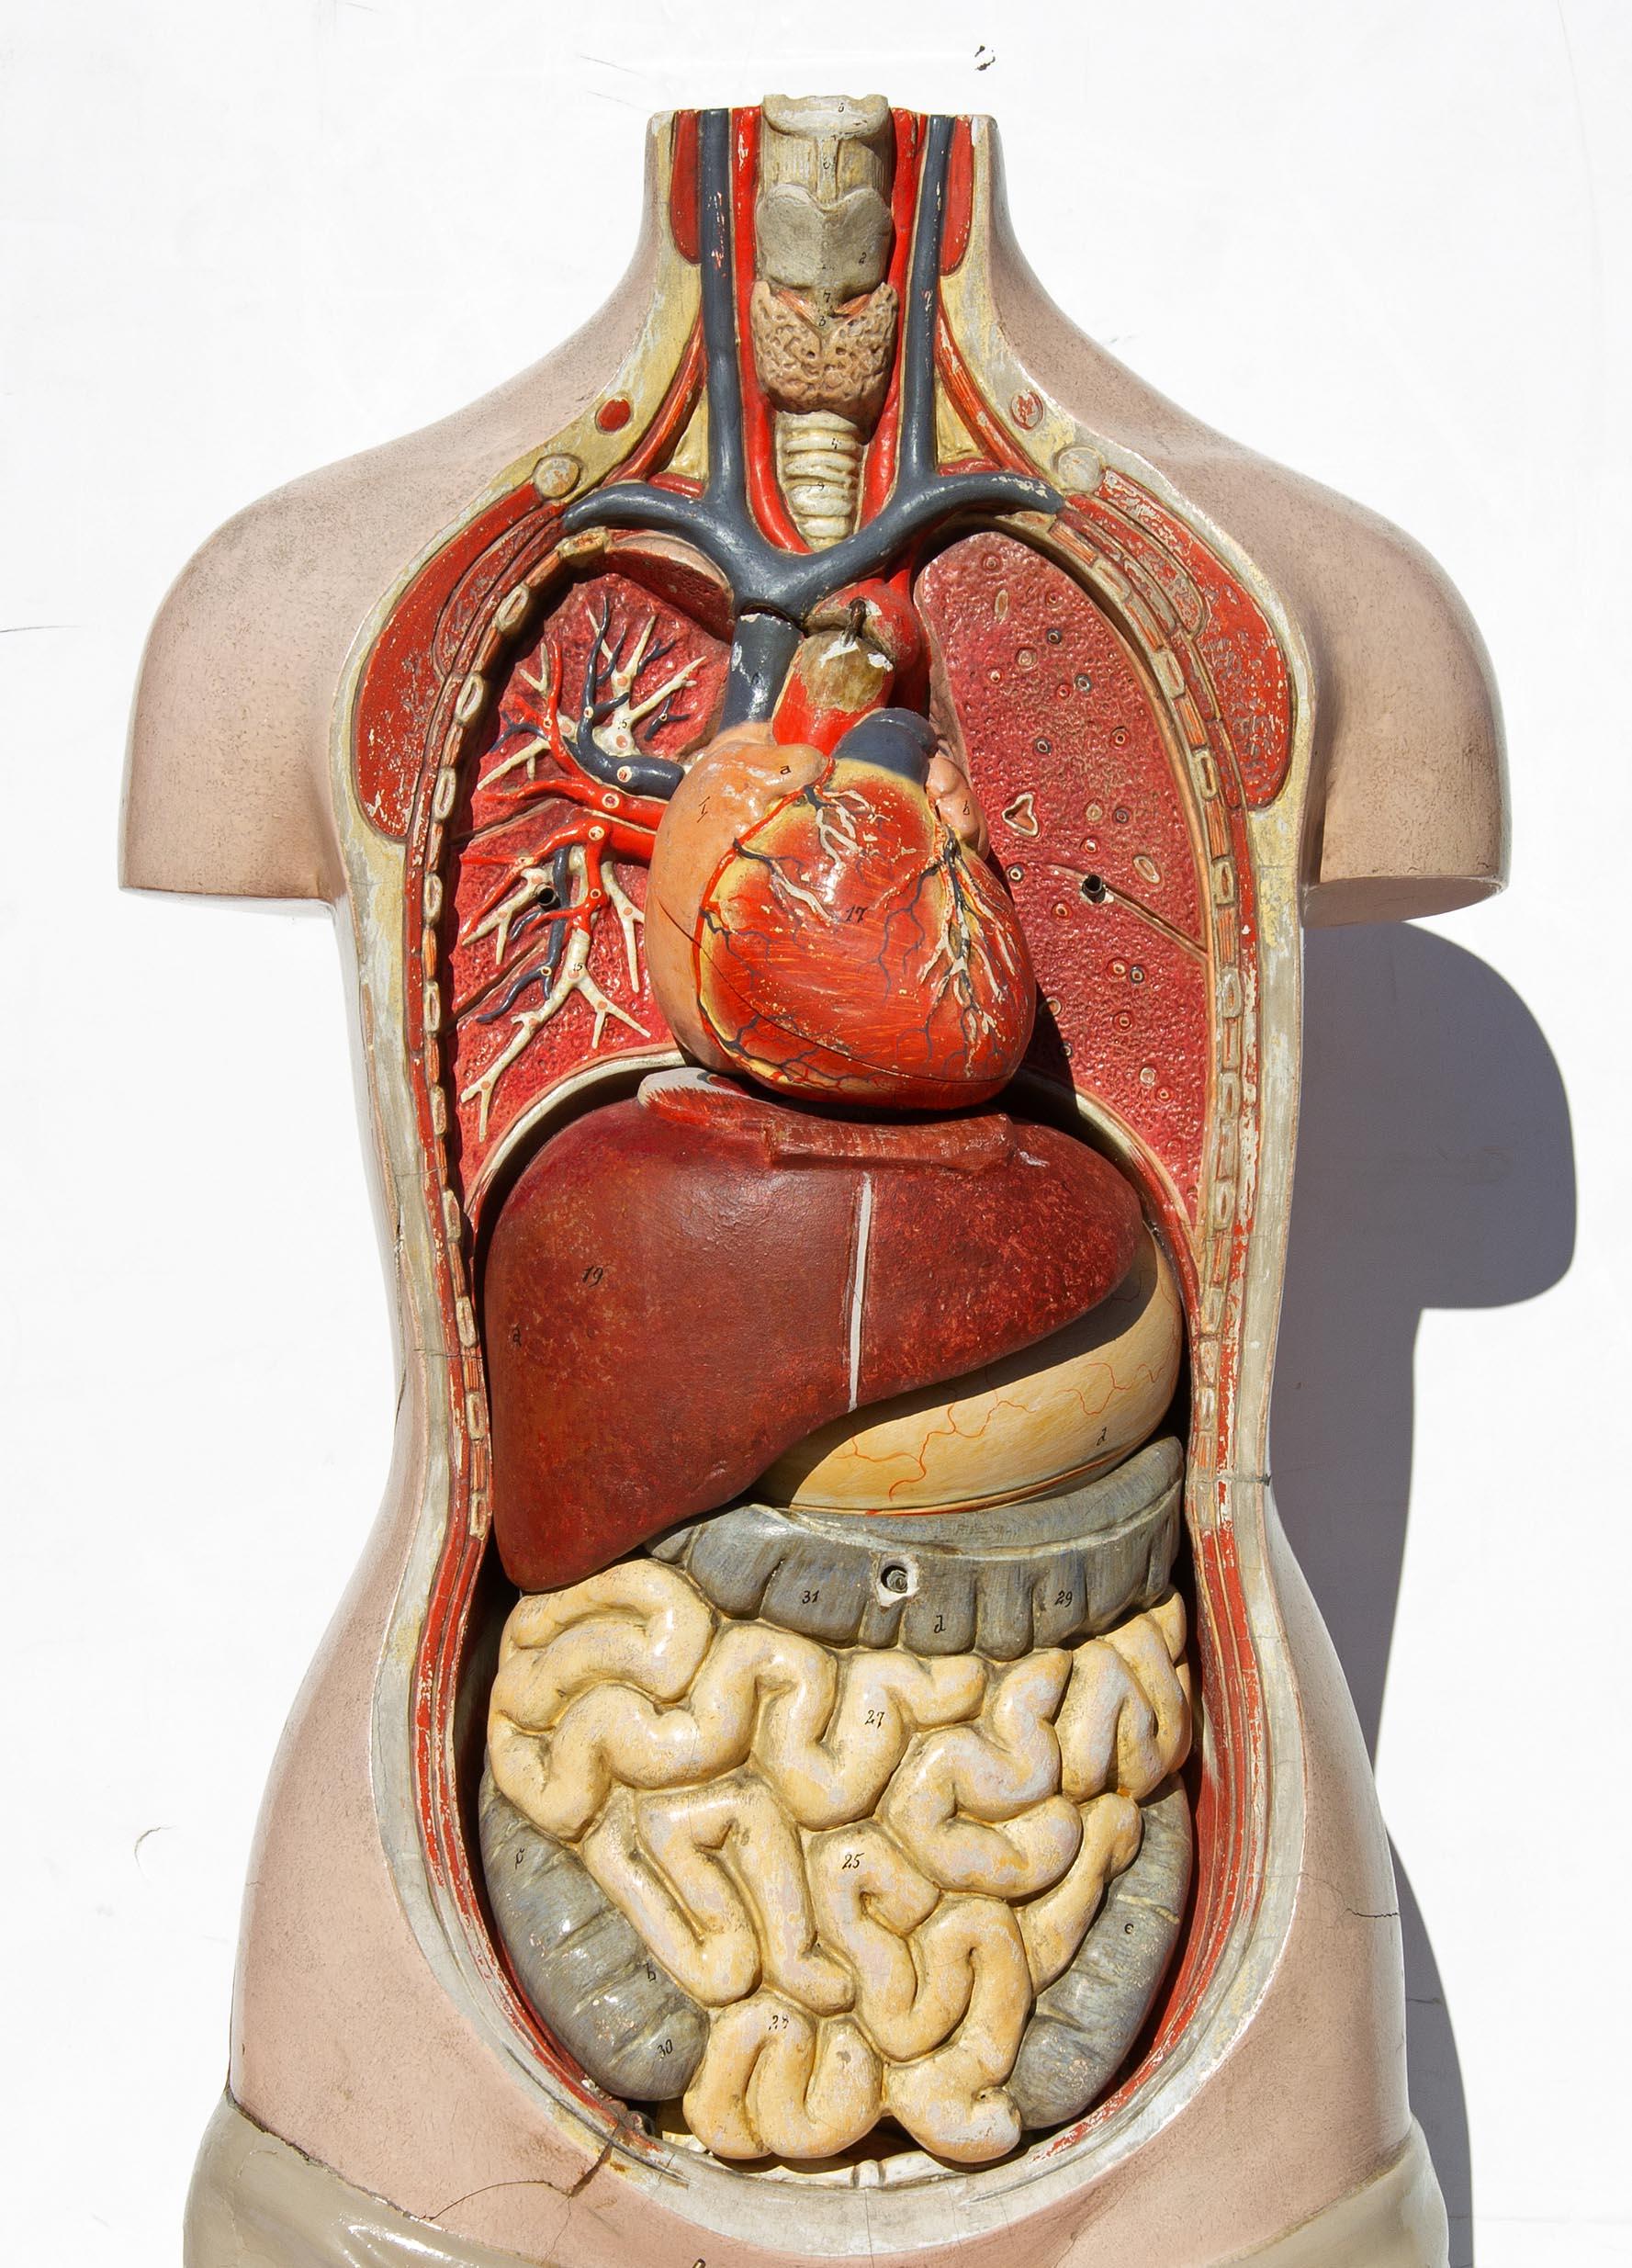 Life-size female anatomical educational model. Hand painted and very detailed. Each organ is removable. The heart is decorated on the interior showing the ventricles, German, circa 1930s. Measure: 27